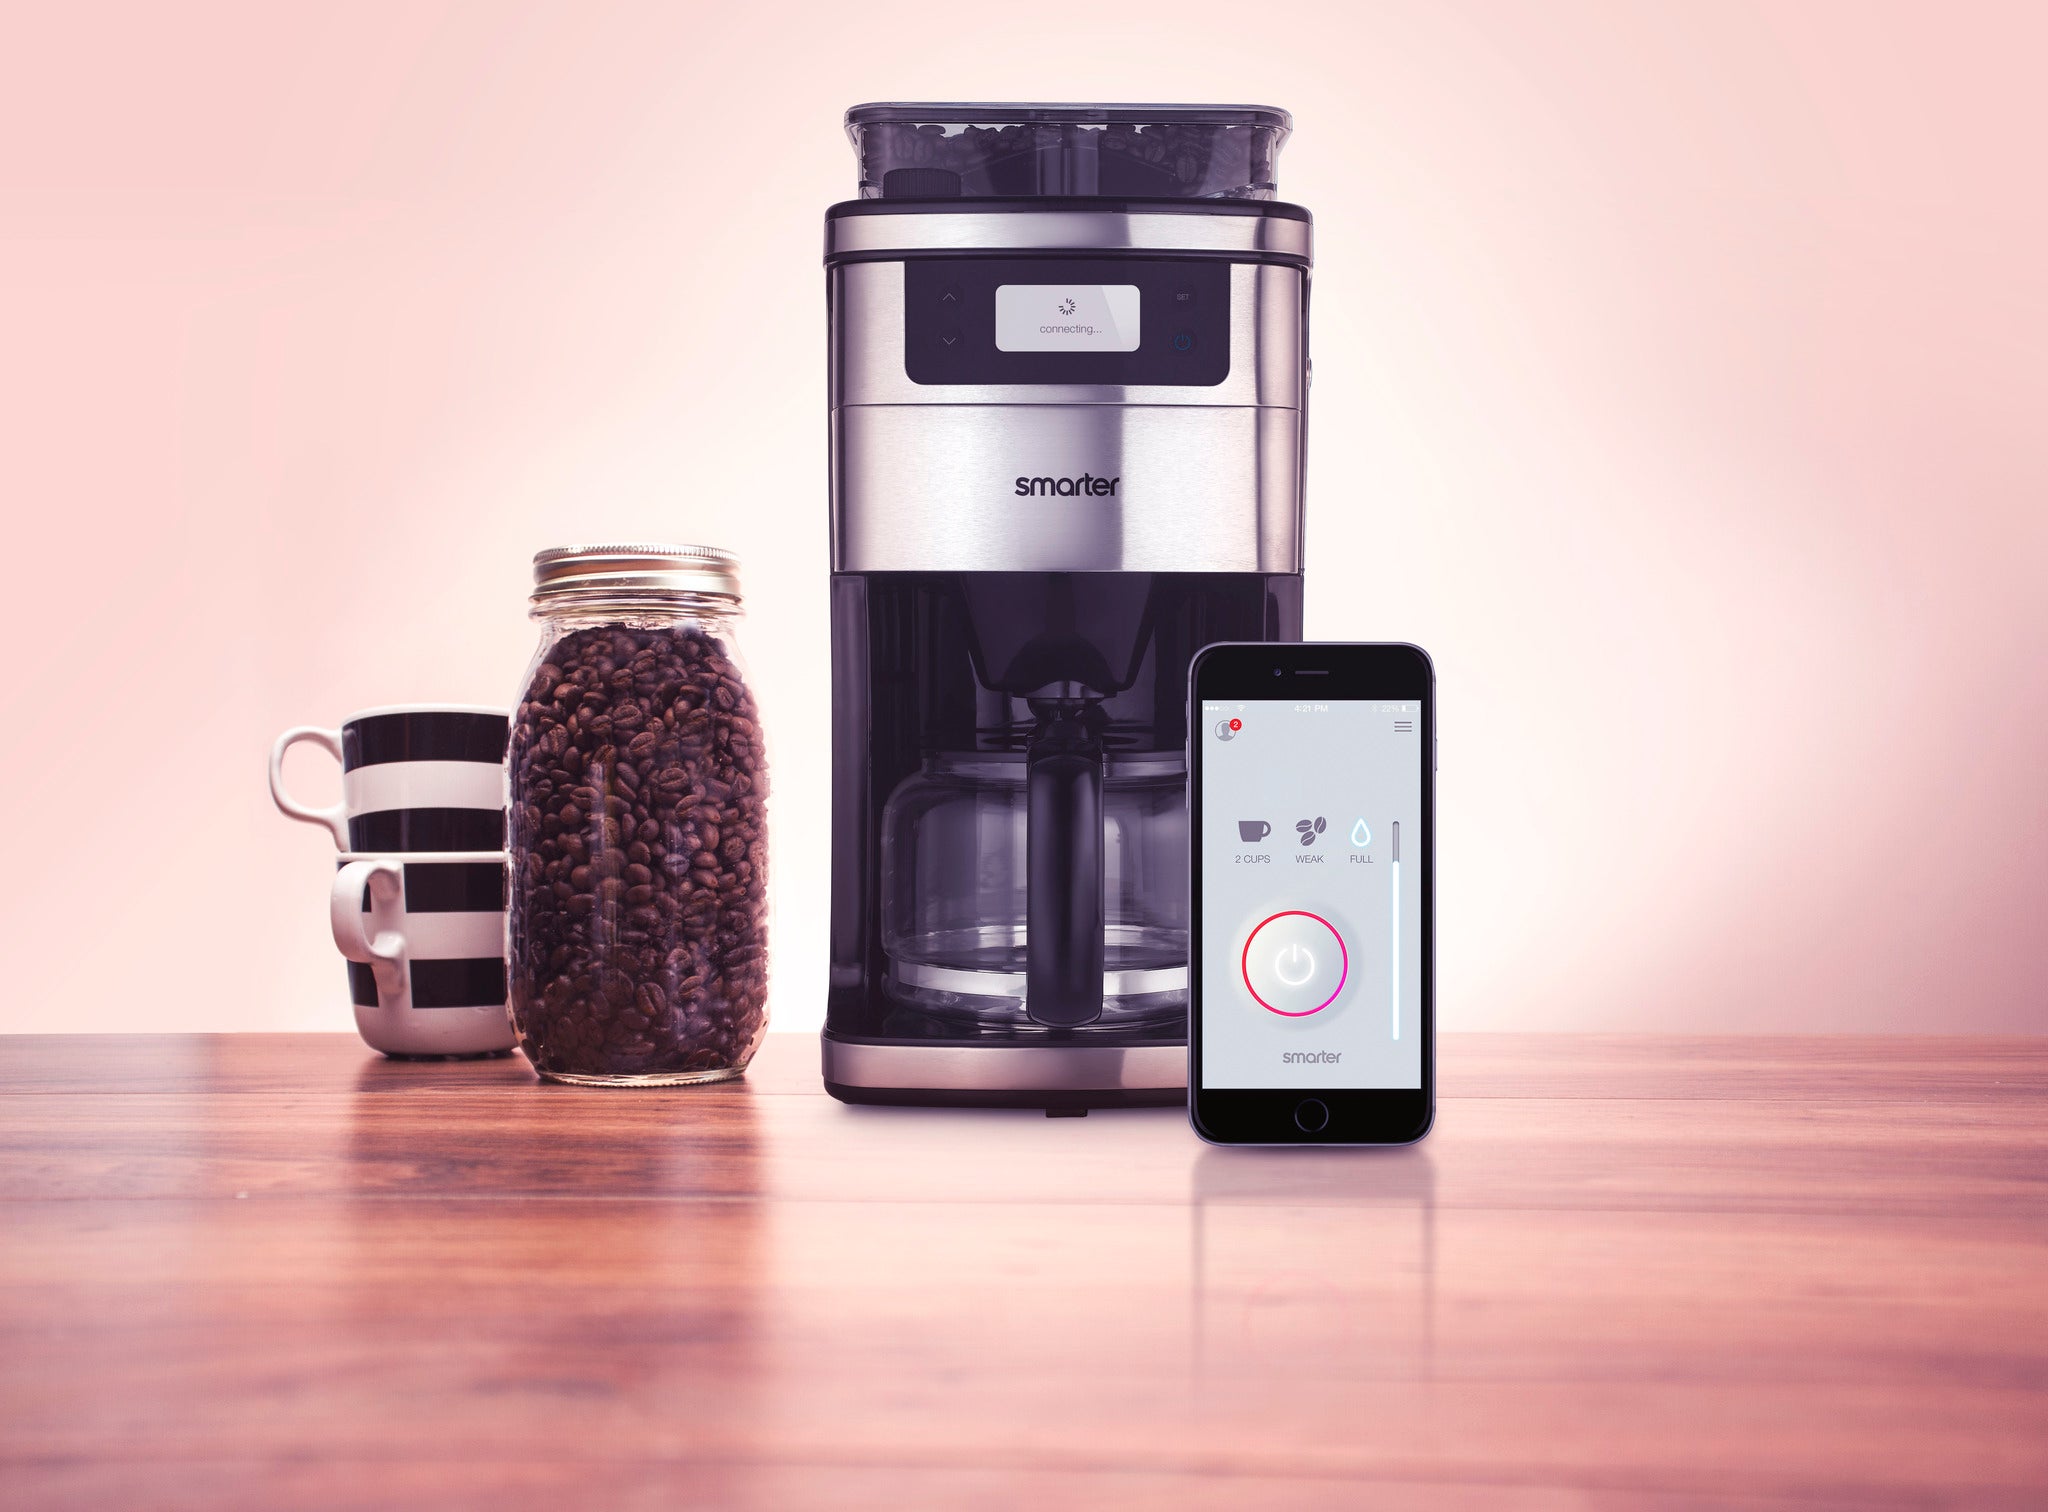 This Coffee Maker Alarm Clock Is Your Own Personal Barista